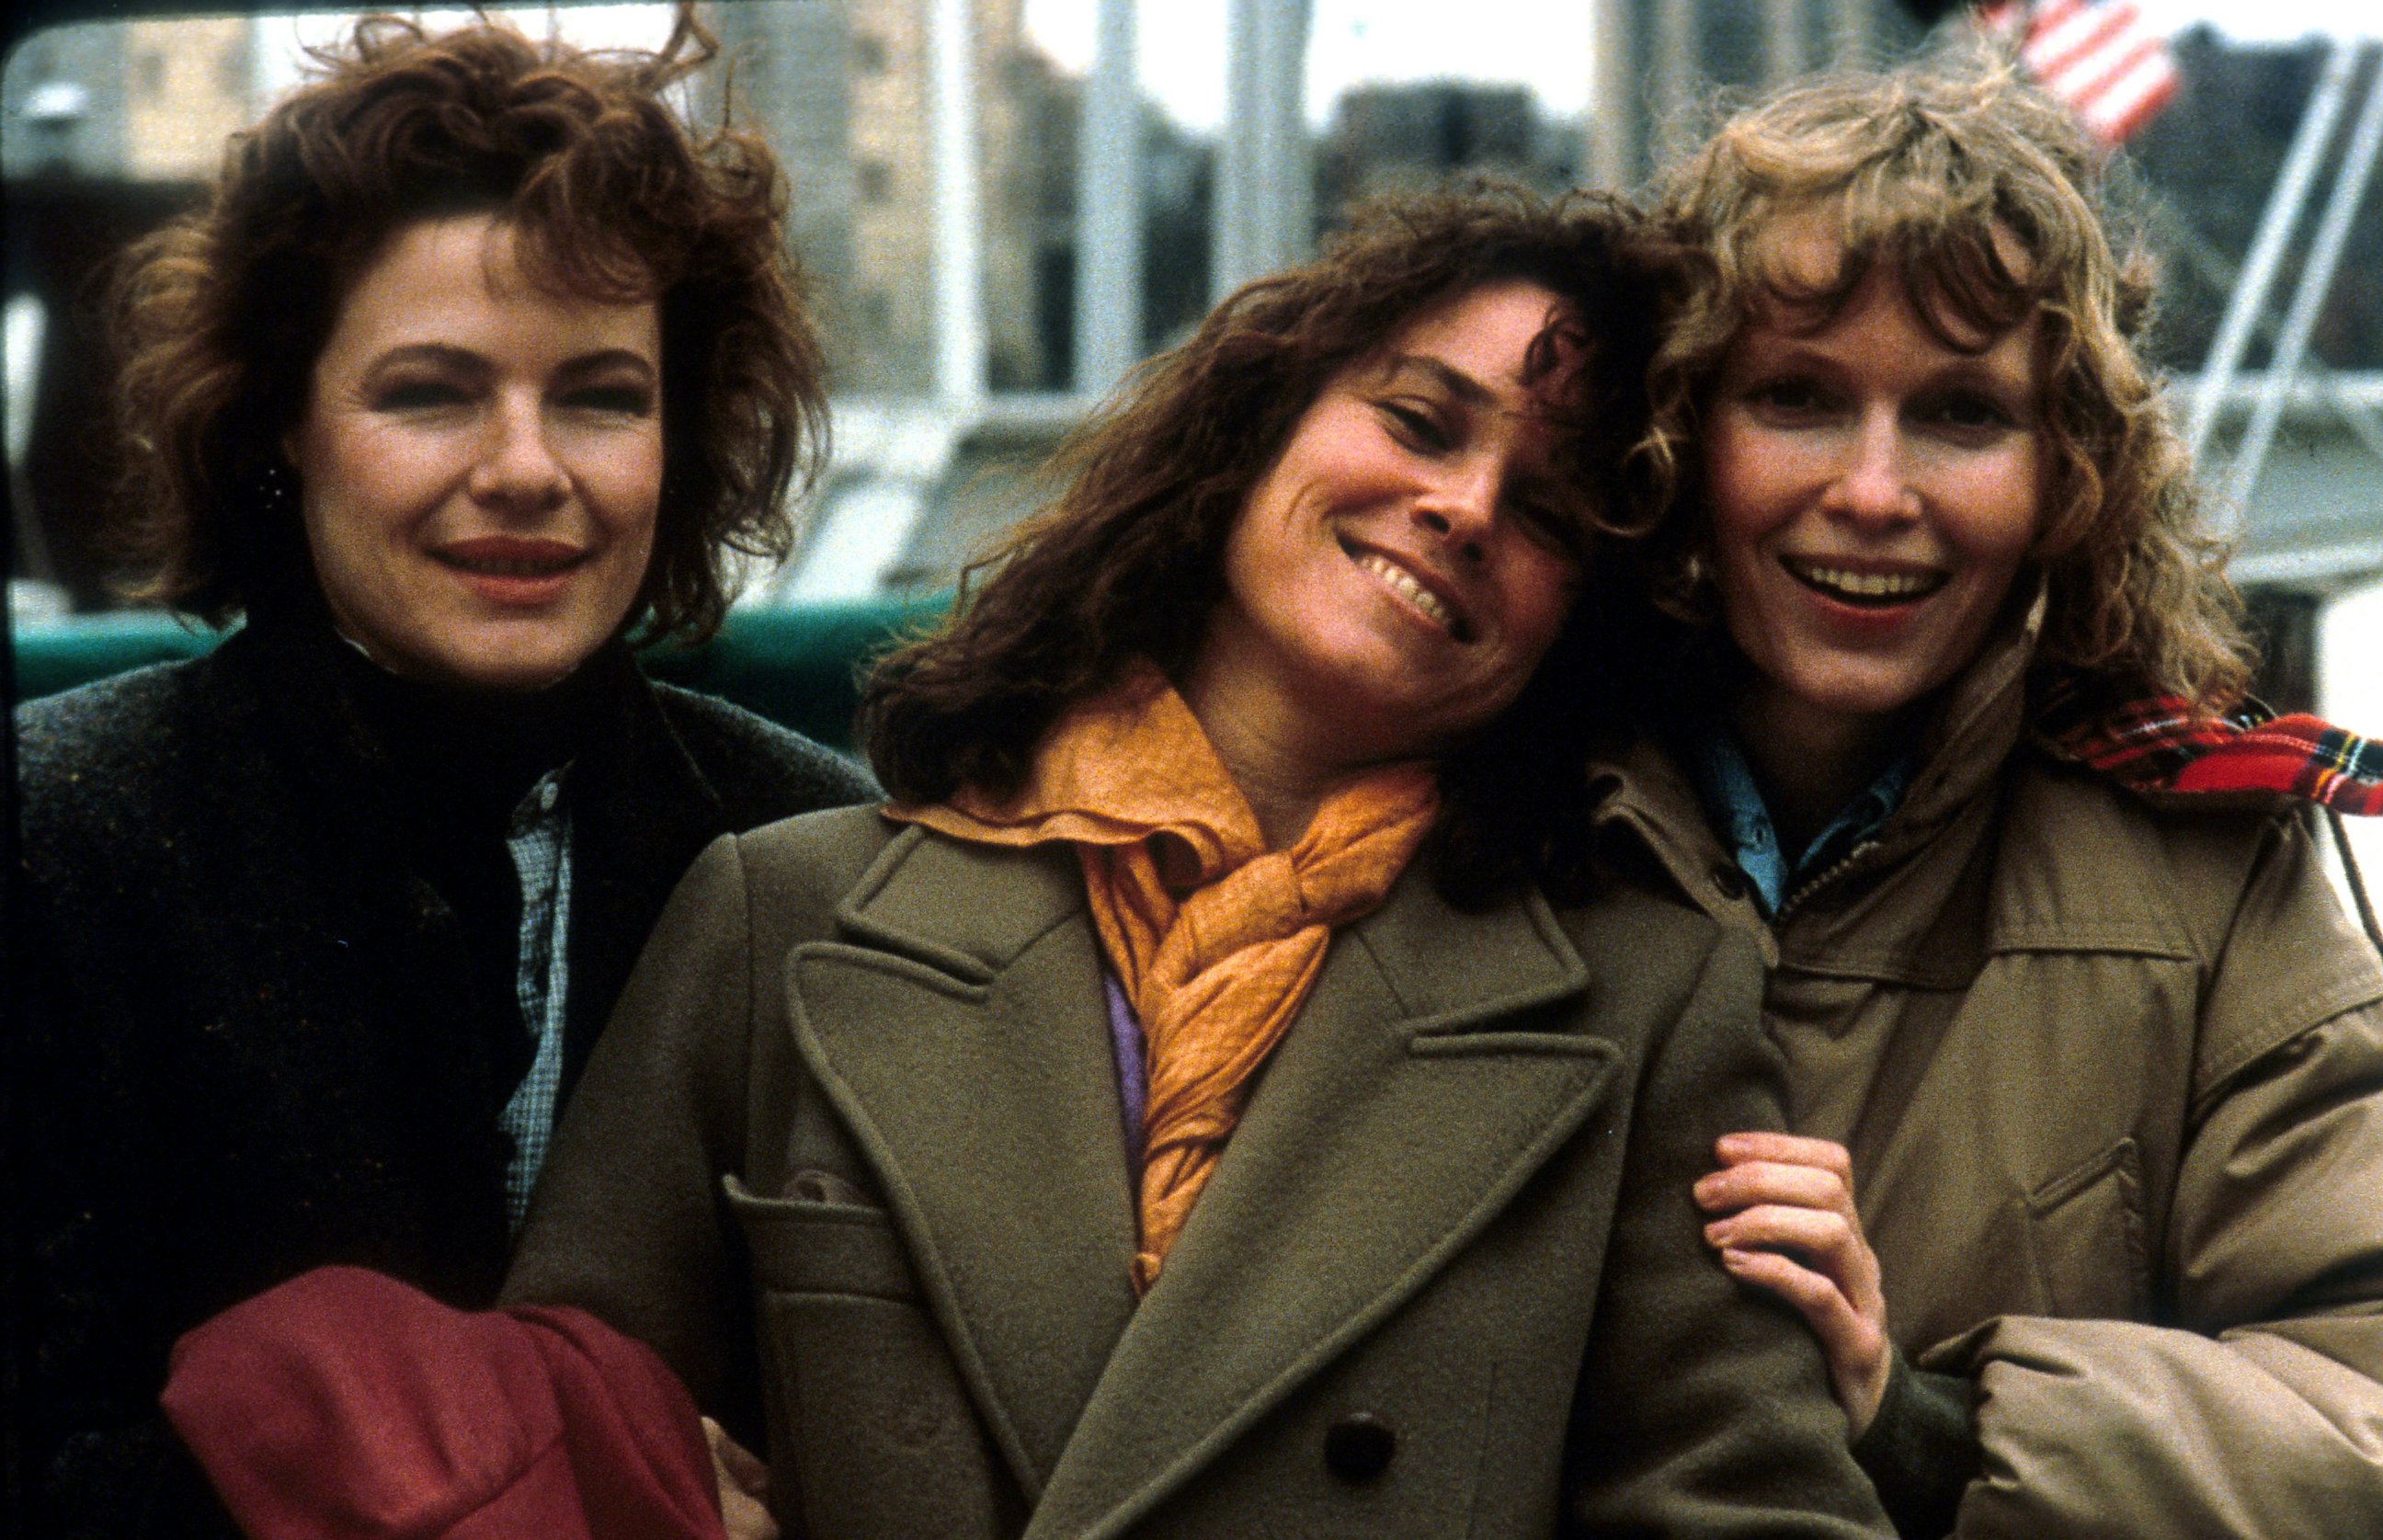 PHOTO: Dianne Wiest, Barbara Hershey and Mia Farrow in a scene from the film 'Hannah And Her Sisters', 1986.